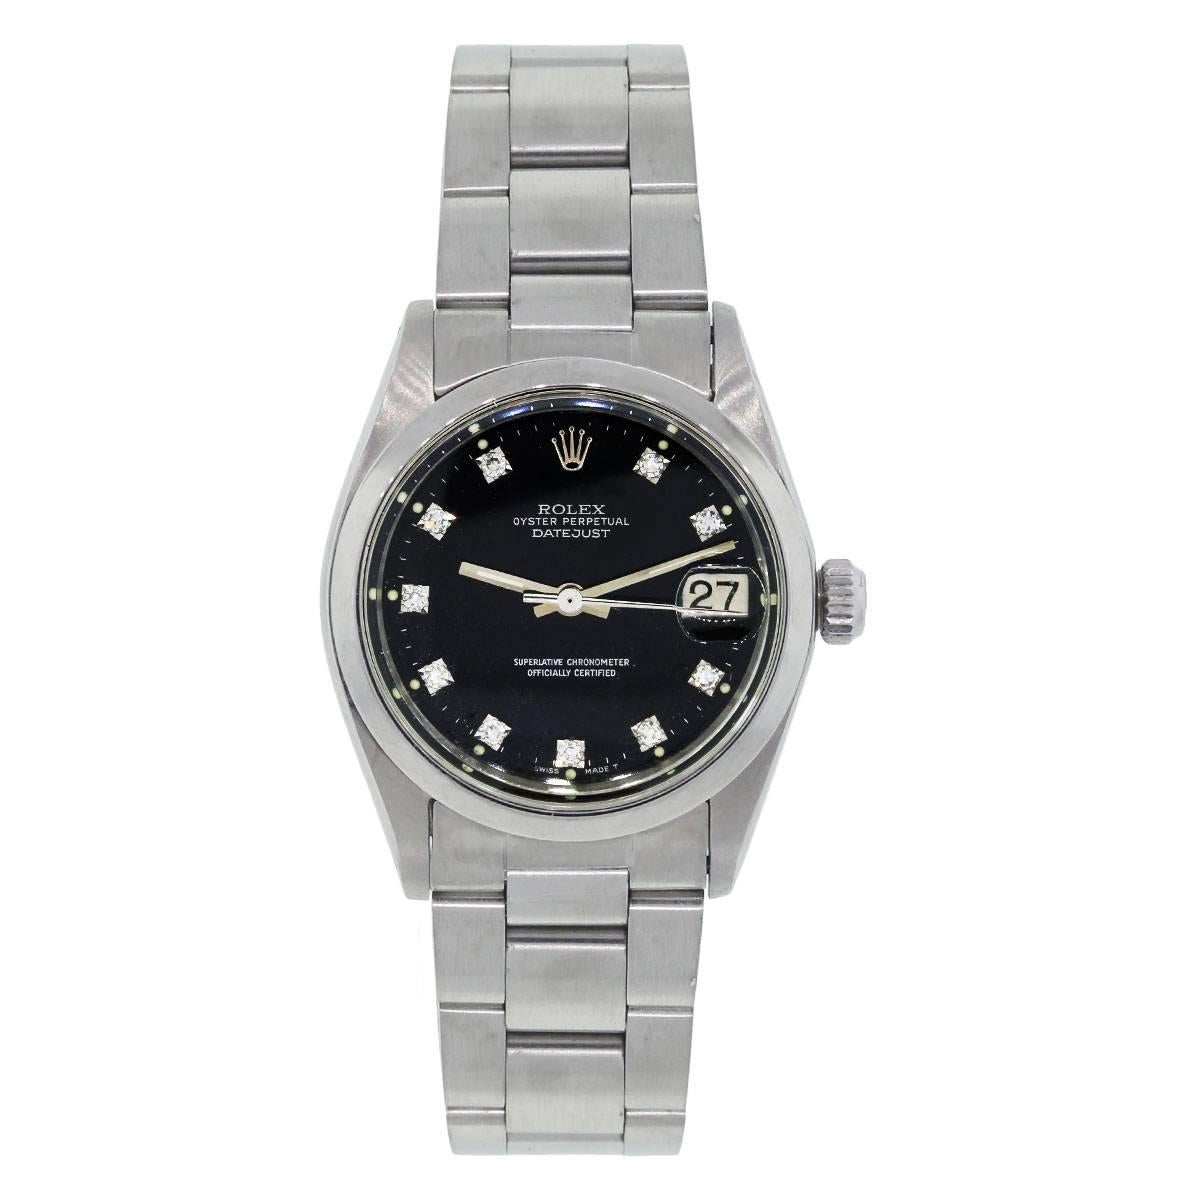 Brand: Rolex
MPN: 6824
Model: Datejust
Case Material: Stainless steel
Case Diameter: 31mm
Crystal: Scratch resistant sapphire
Bezel: Stainless steel smooth bezel
Dial: Black diamond dial with date window at the 3 o’clock position (factory)
Bracelet: